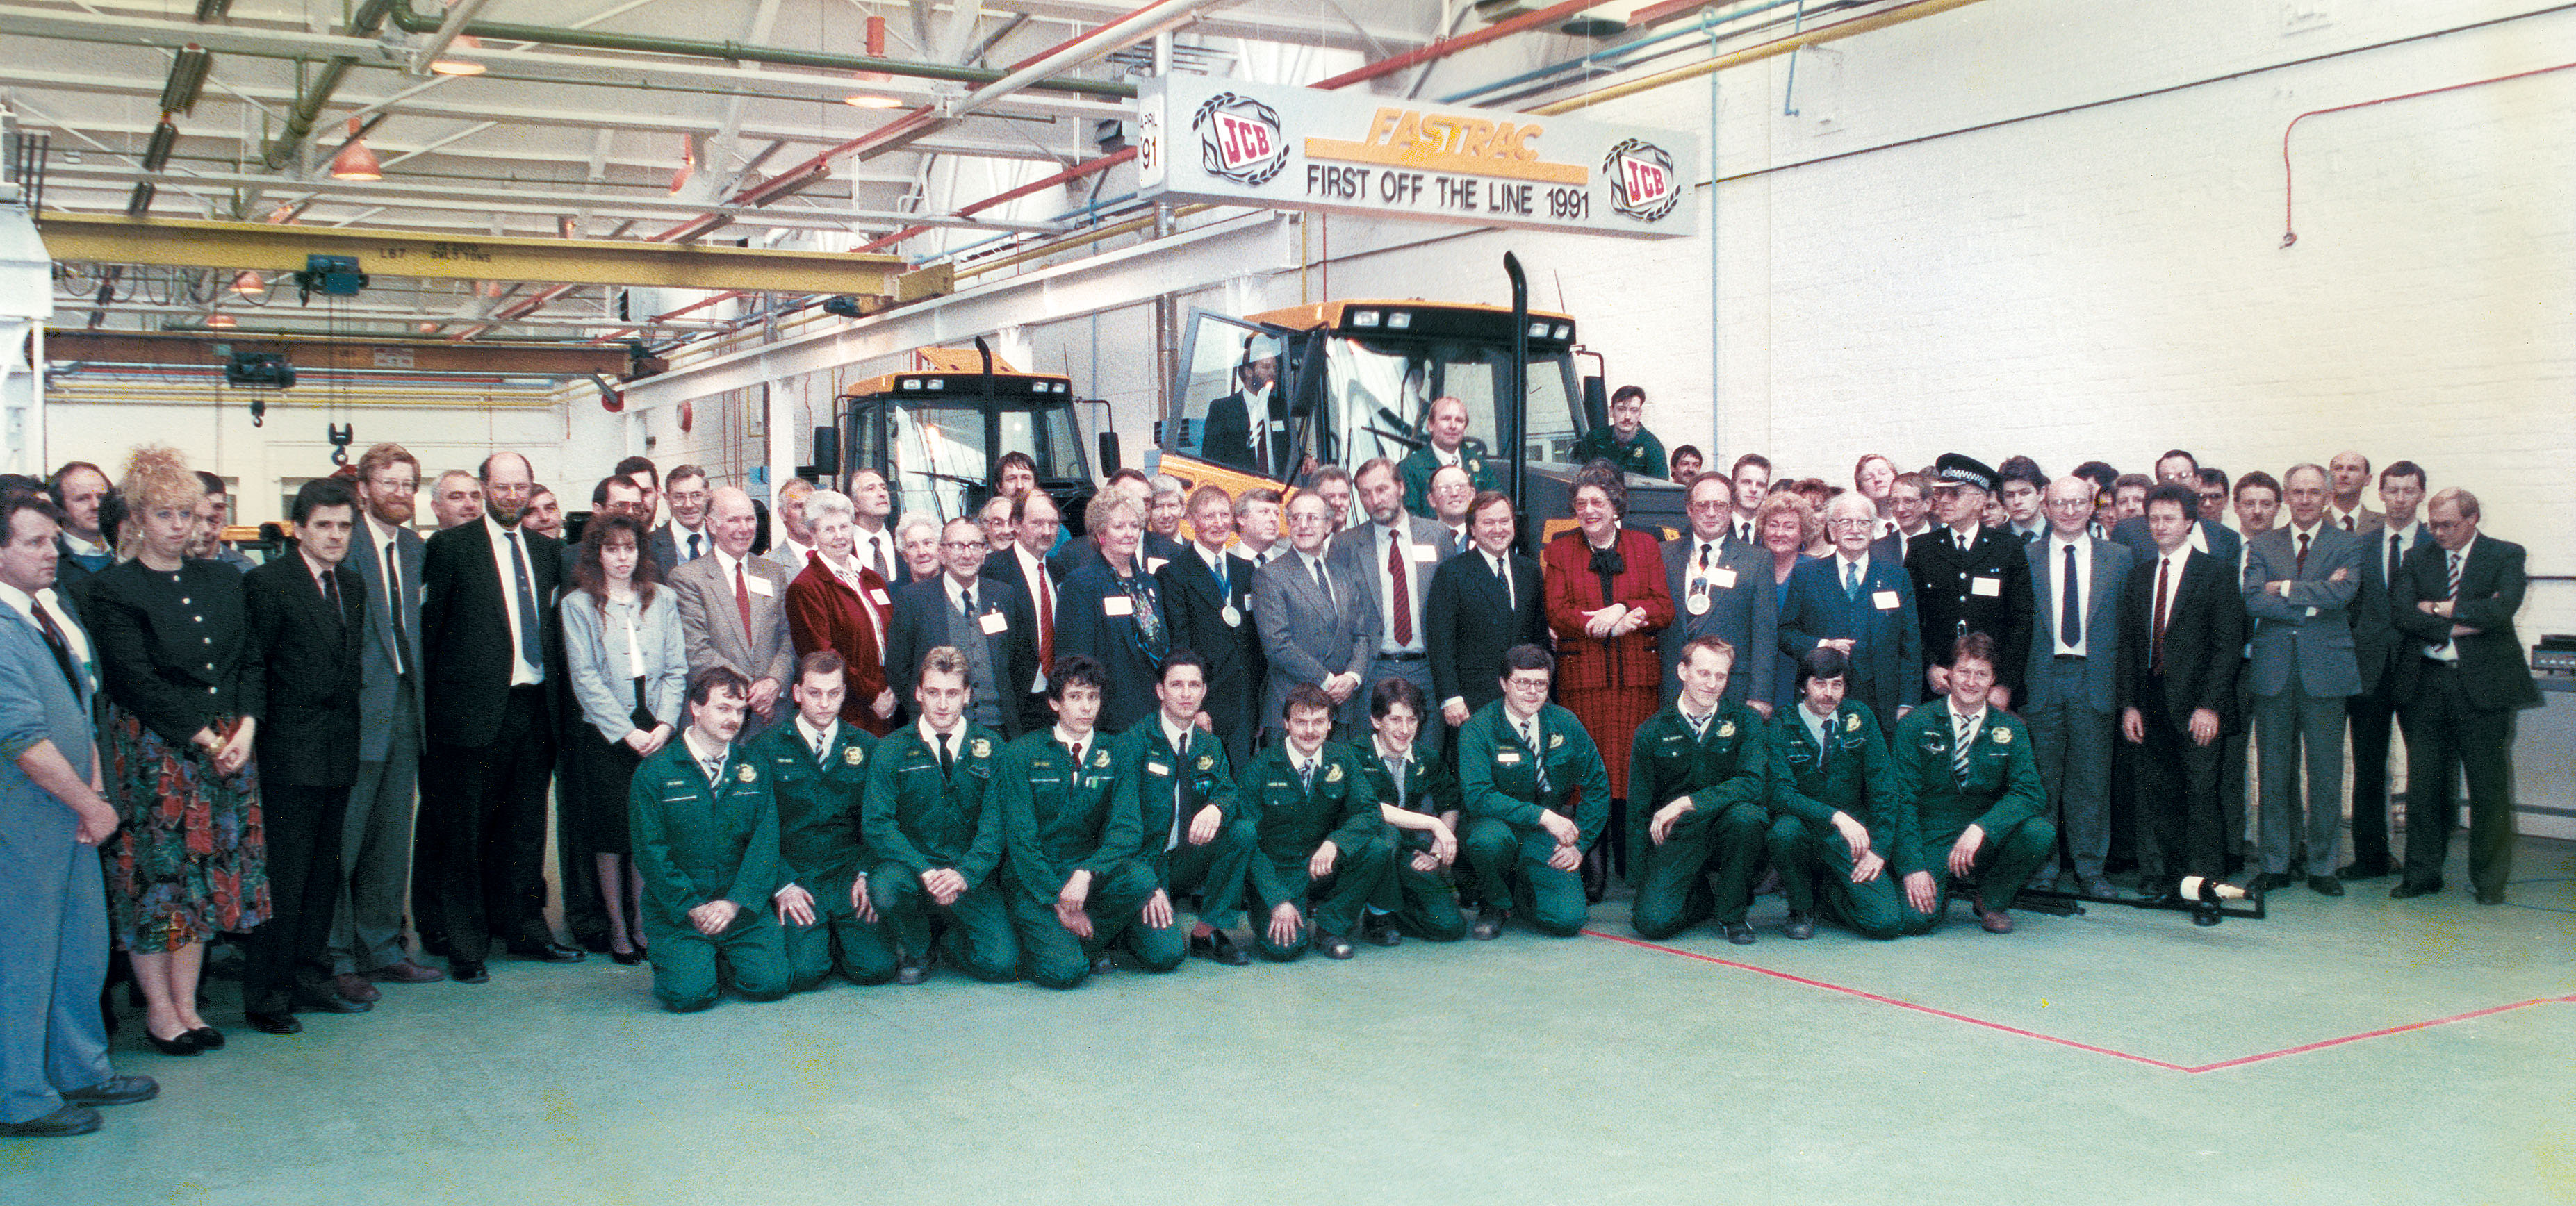 1991 - employees mark the production of the first Fastrac